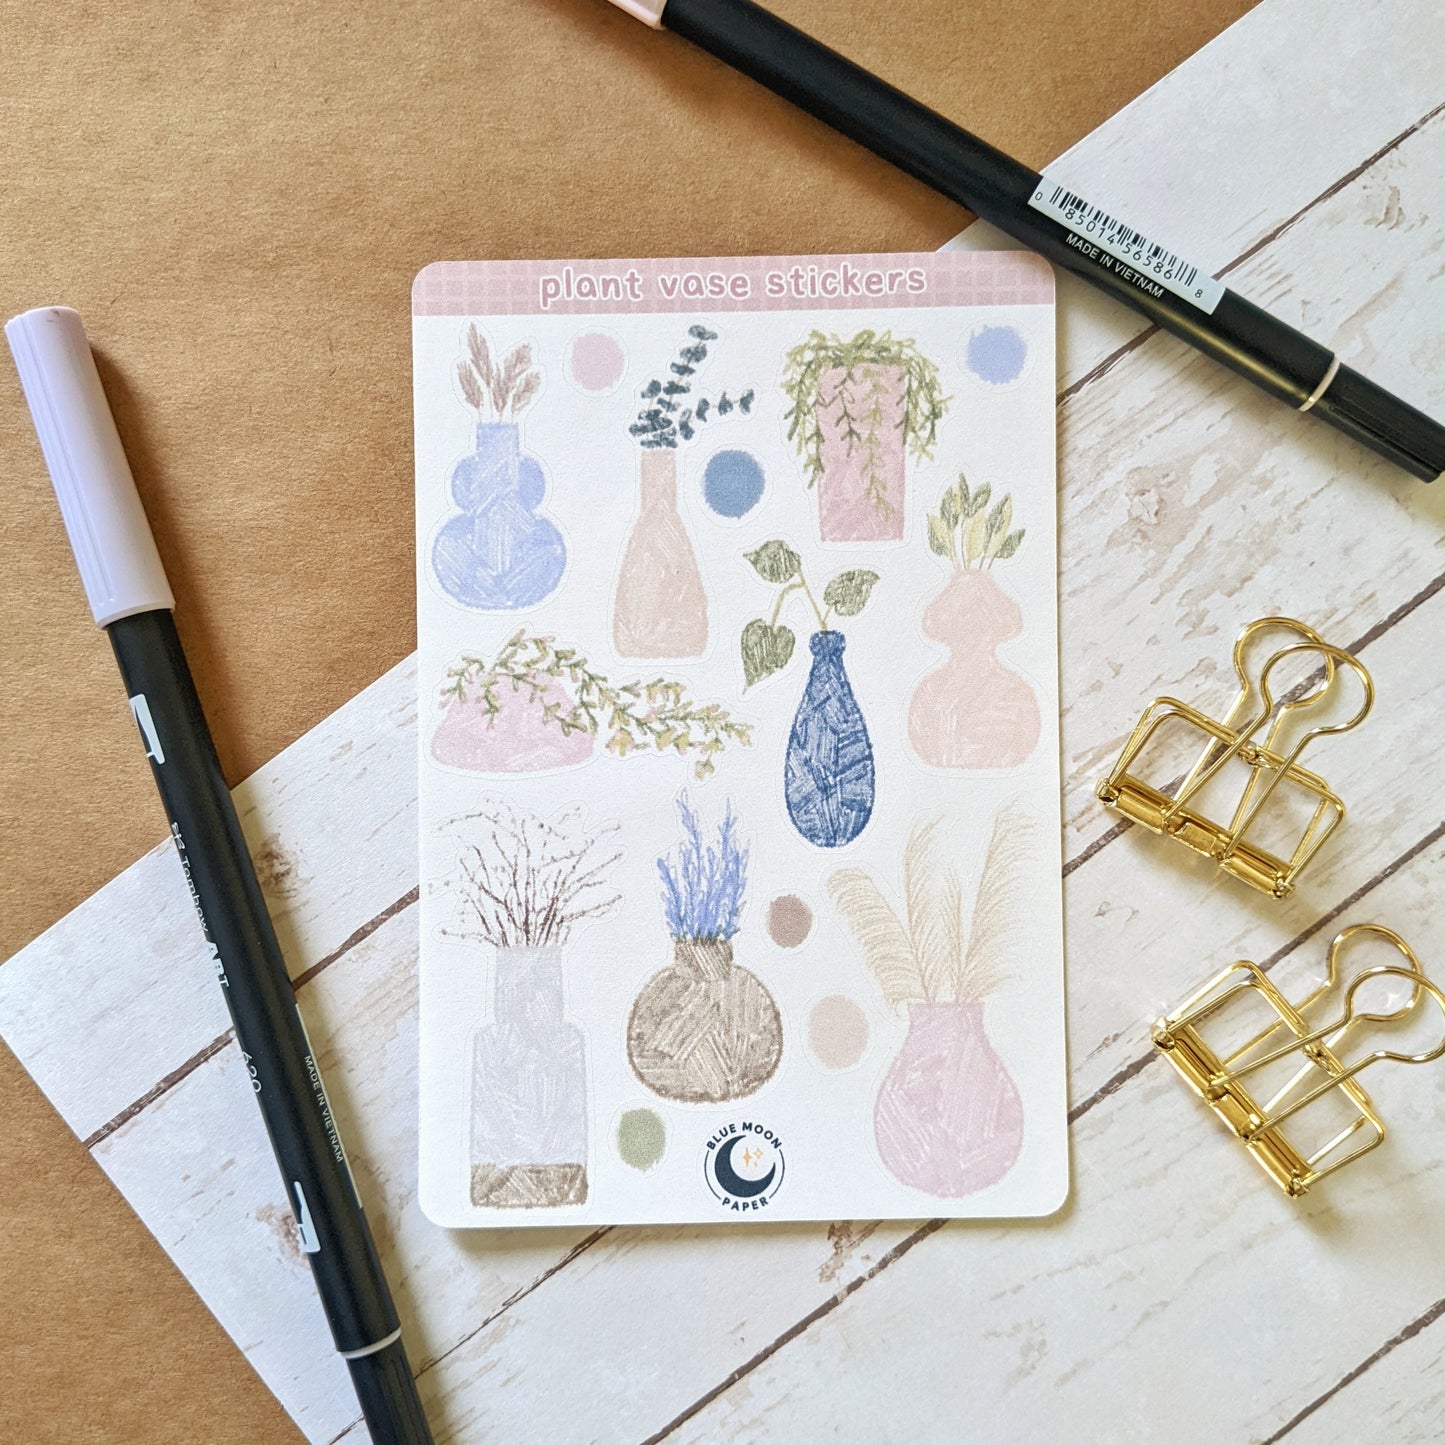 Sticker sheet featuring sketchy illustrations of various plants in vases and pots, and surrounded by dots of colour.